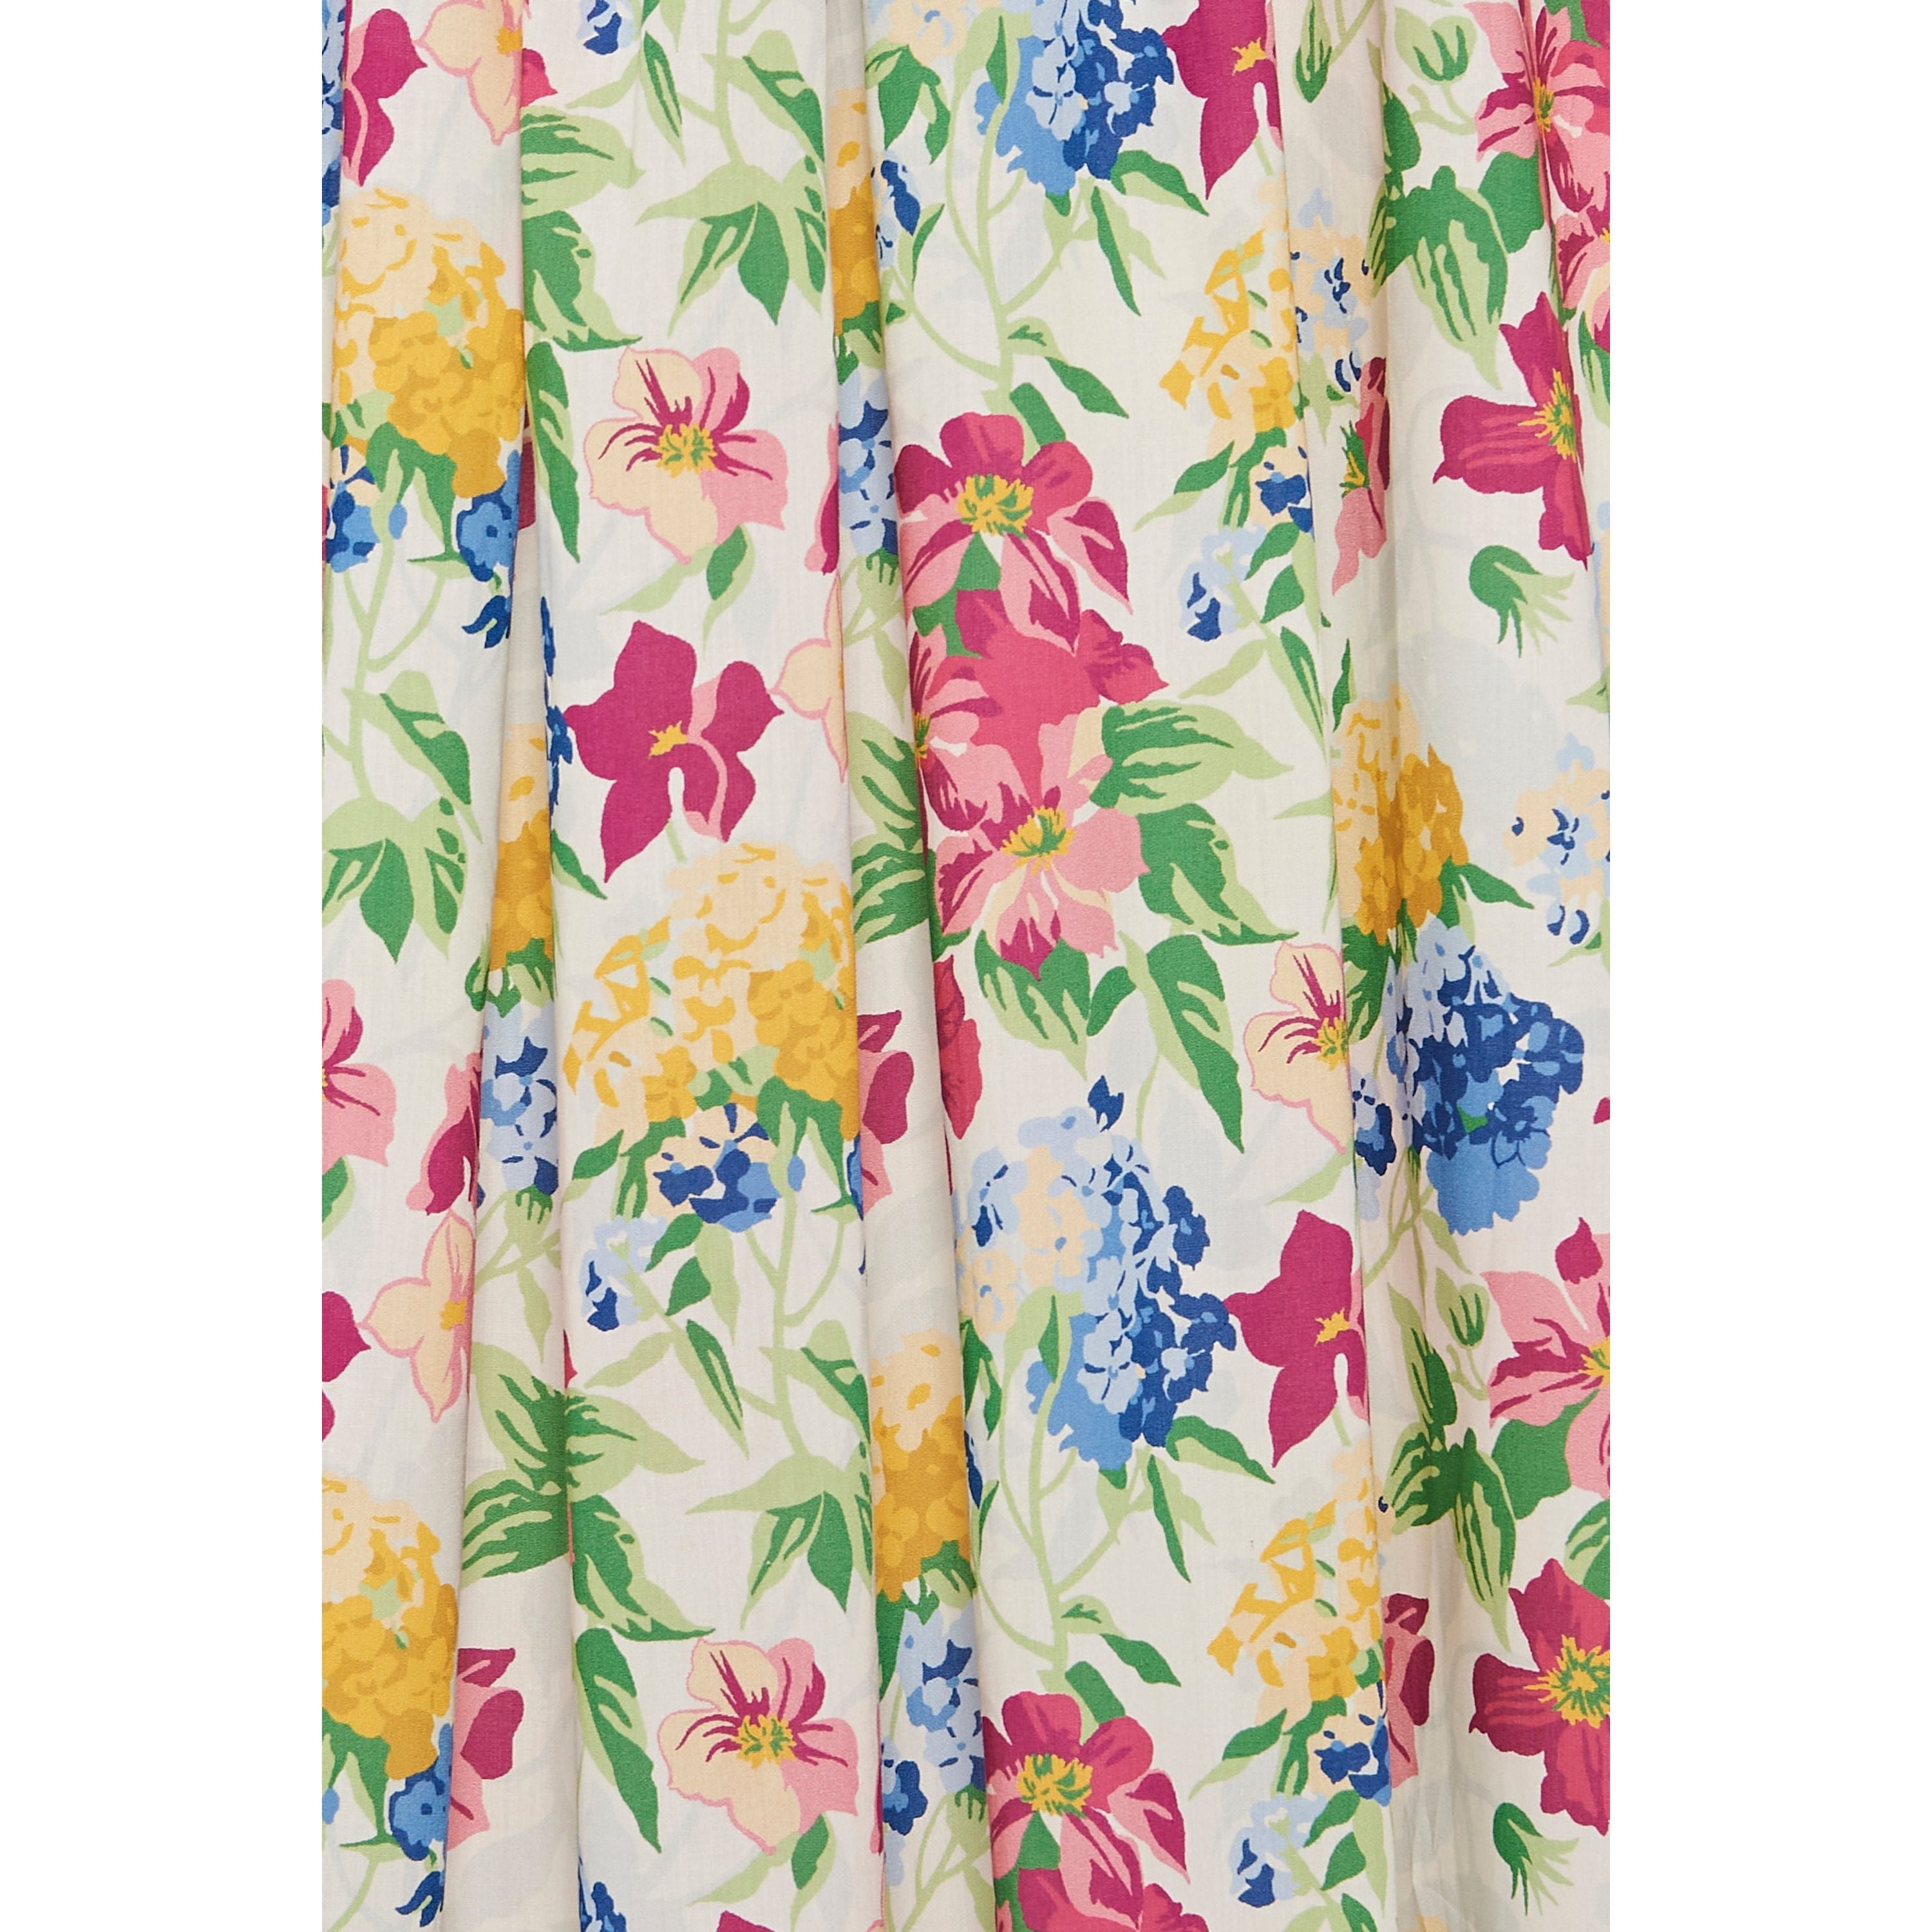 Women's Jaime Dress in Colorful Happy Floral by Casey Marks